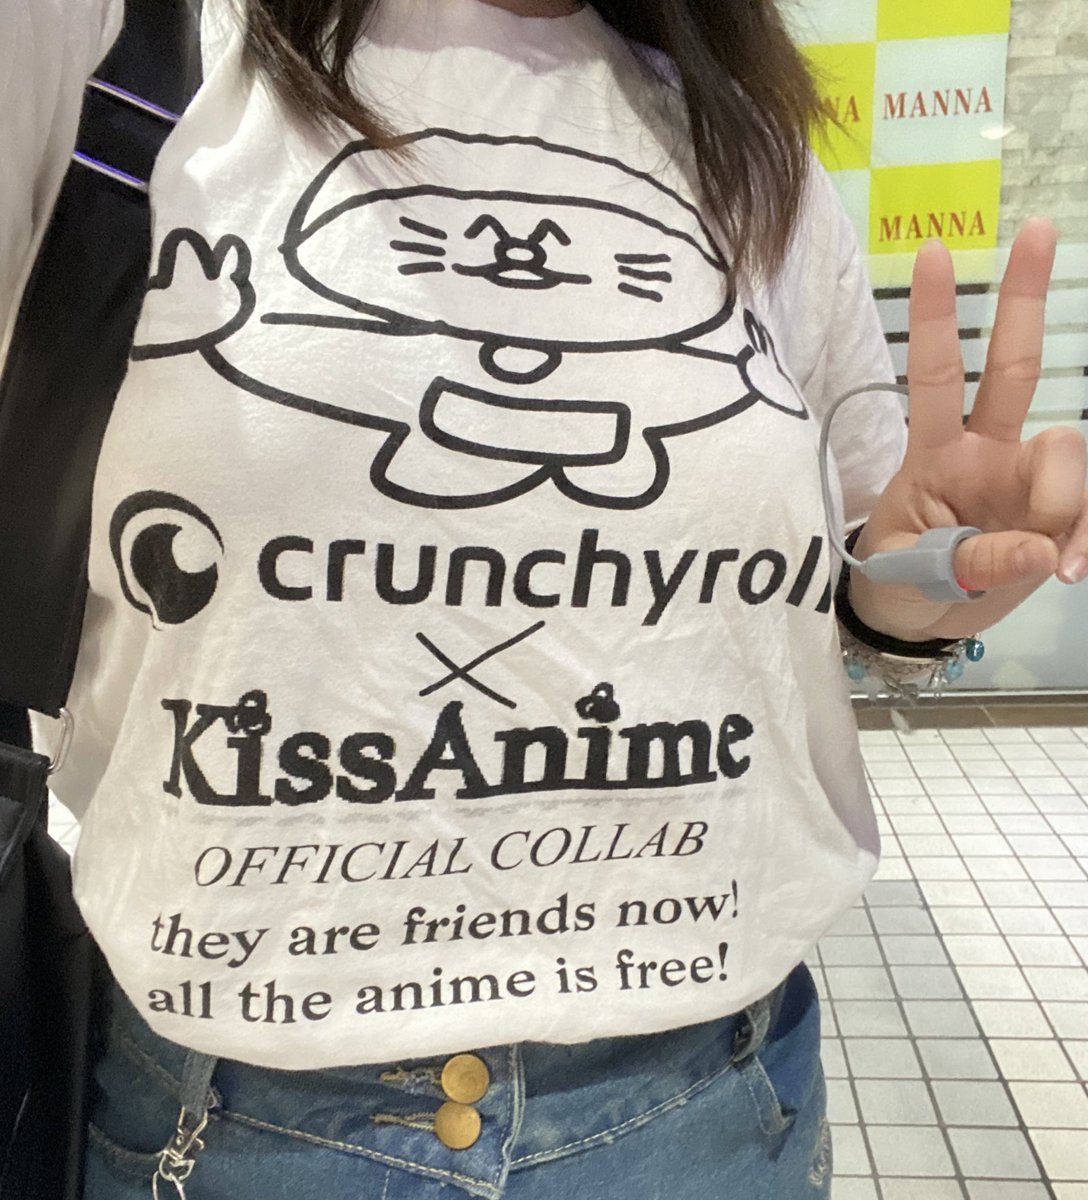 it’s my birthday celebration and the theme is “weeaboo trash” here is my shirt